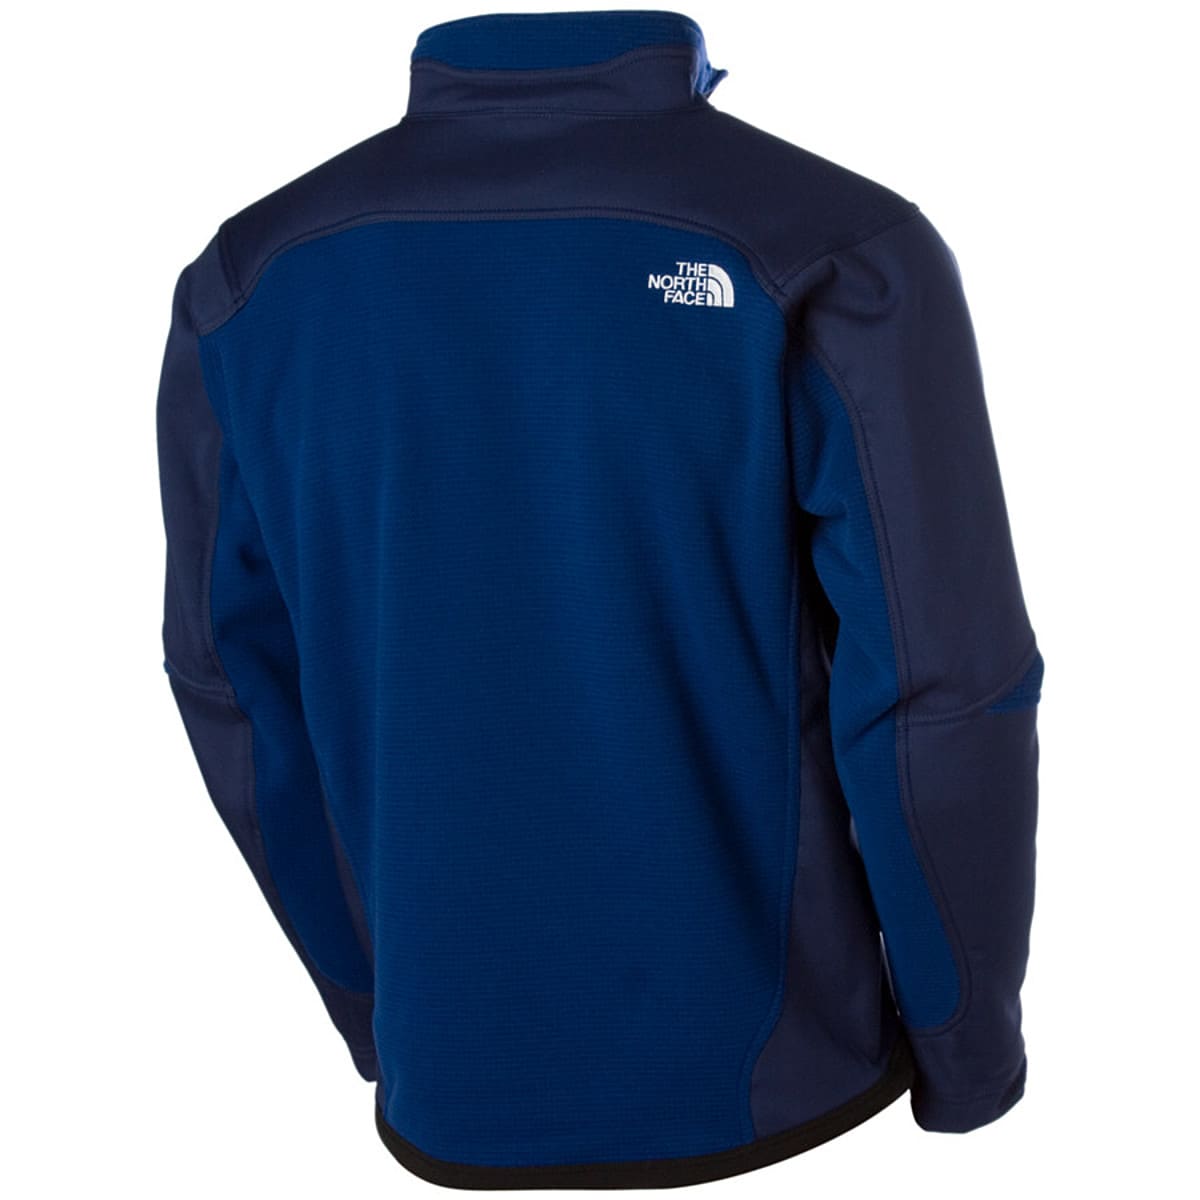 The North Face WindWall Thermal Fleece Jacket - Men's - Clothing